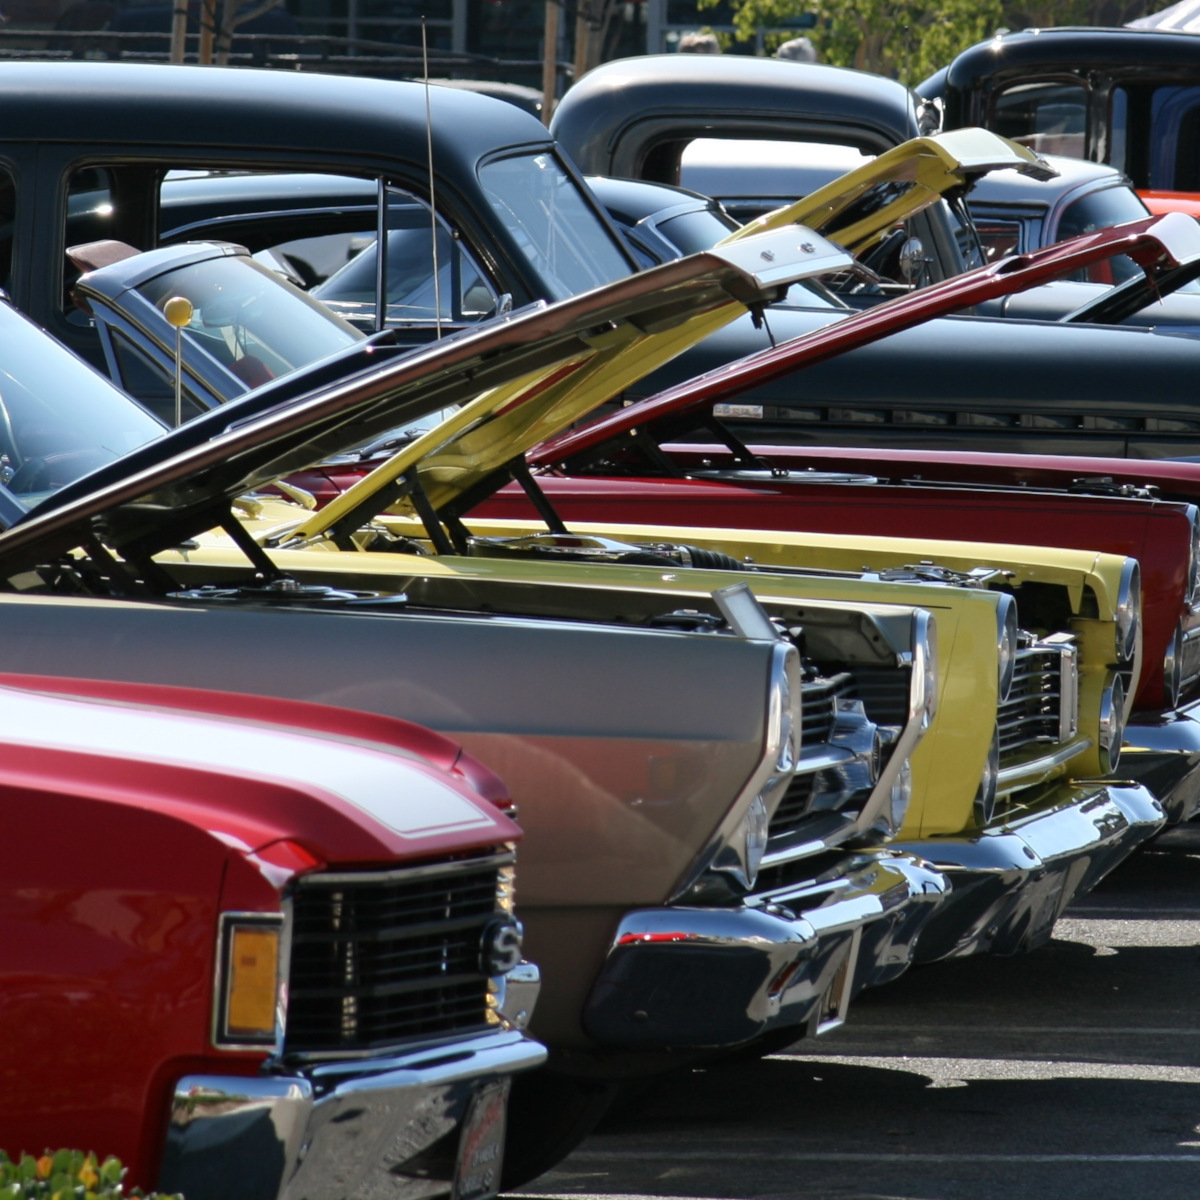 Which Des Moines Car Shows Should You Attend This Year?